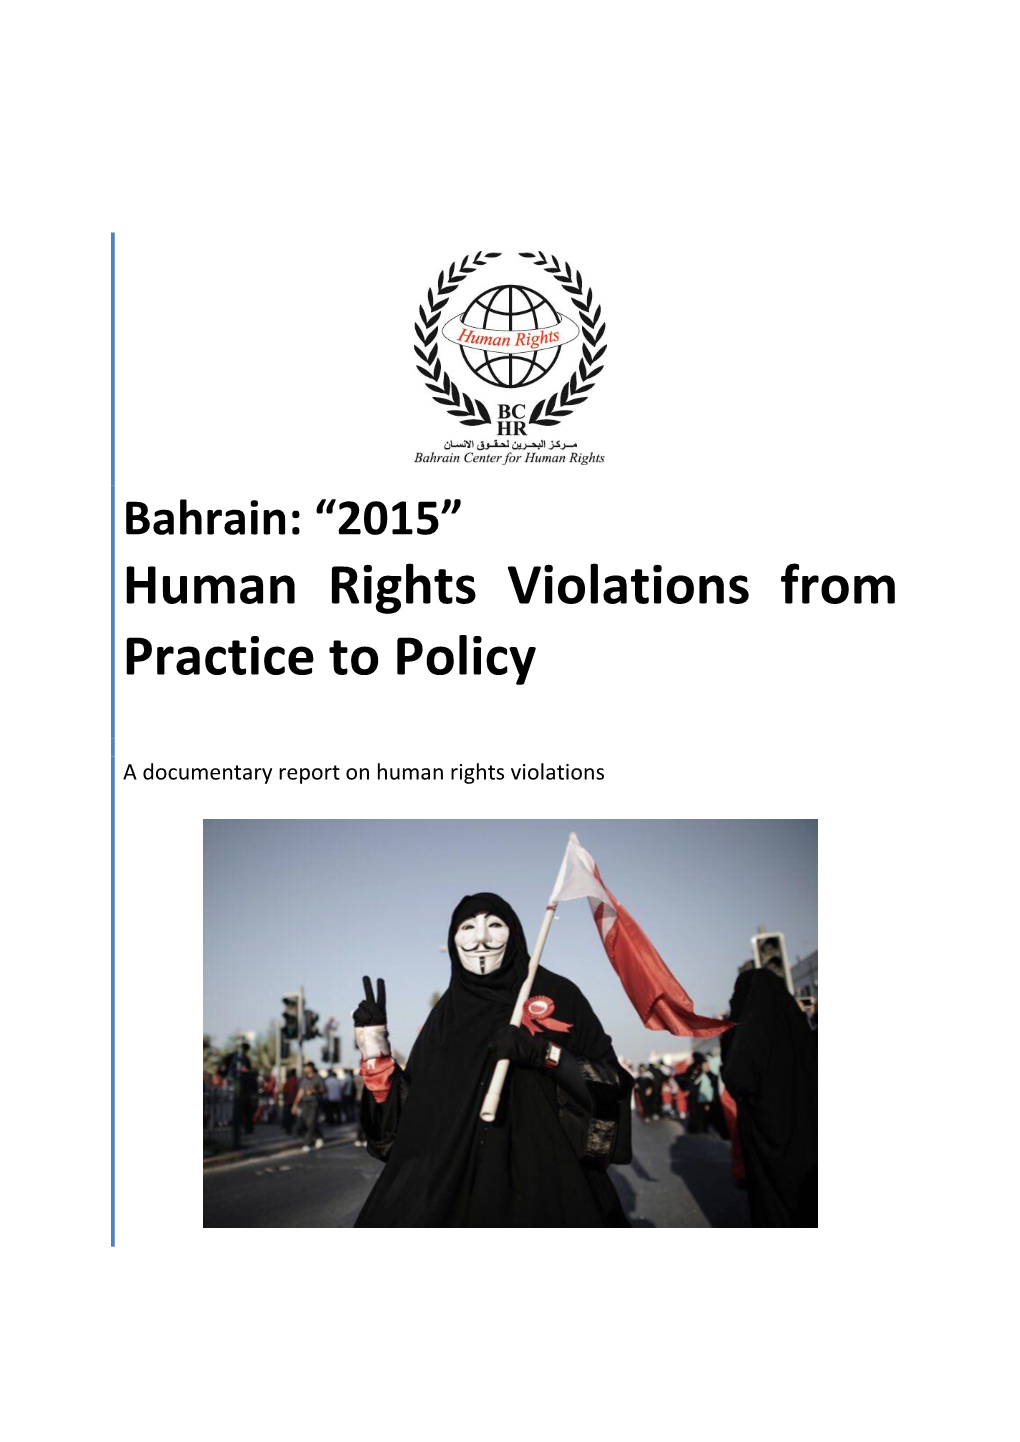 Human Rights Violations from Practice to Policy